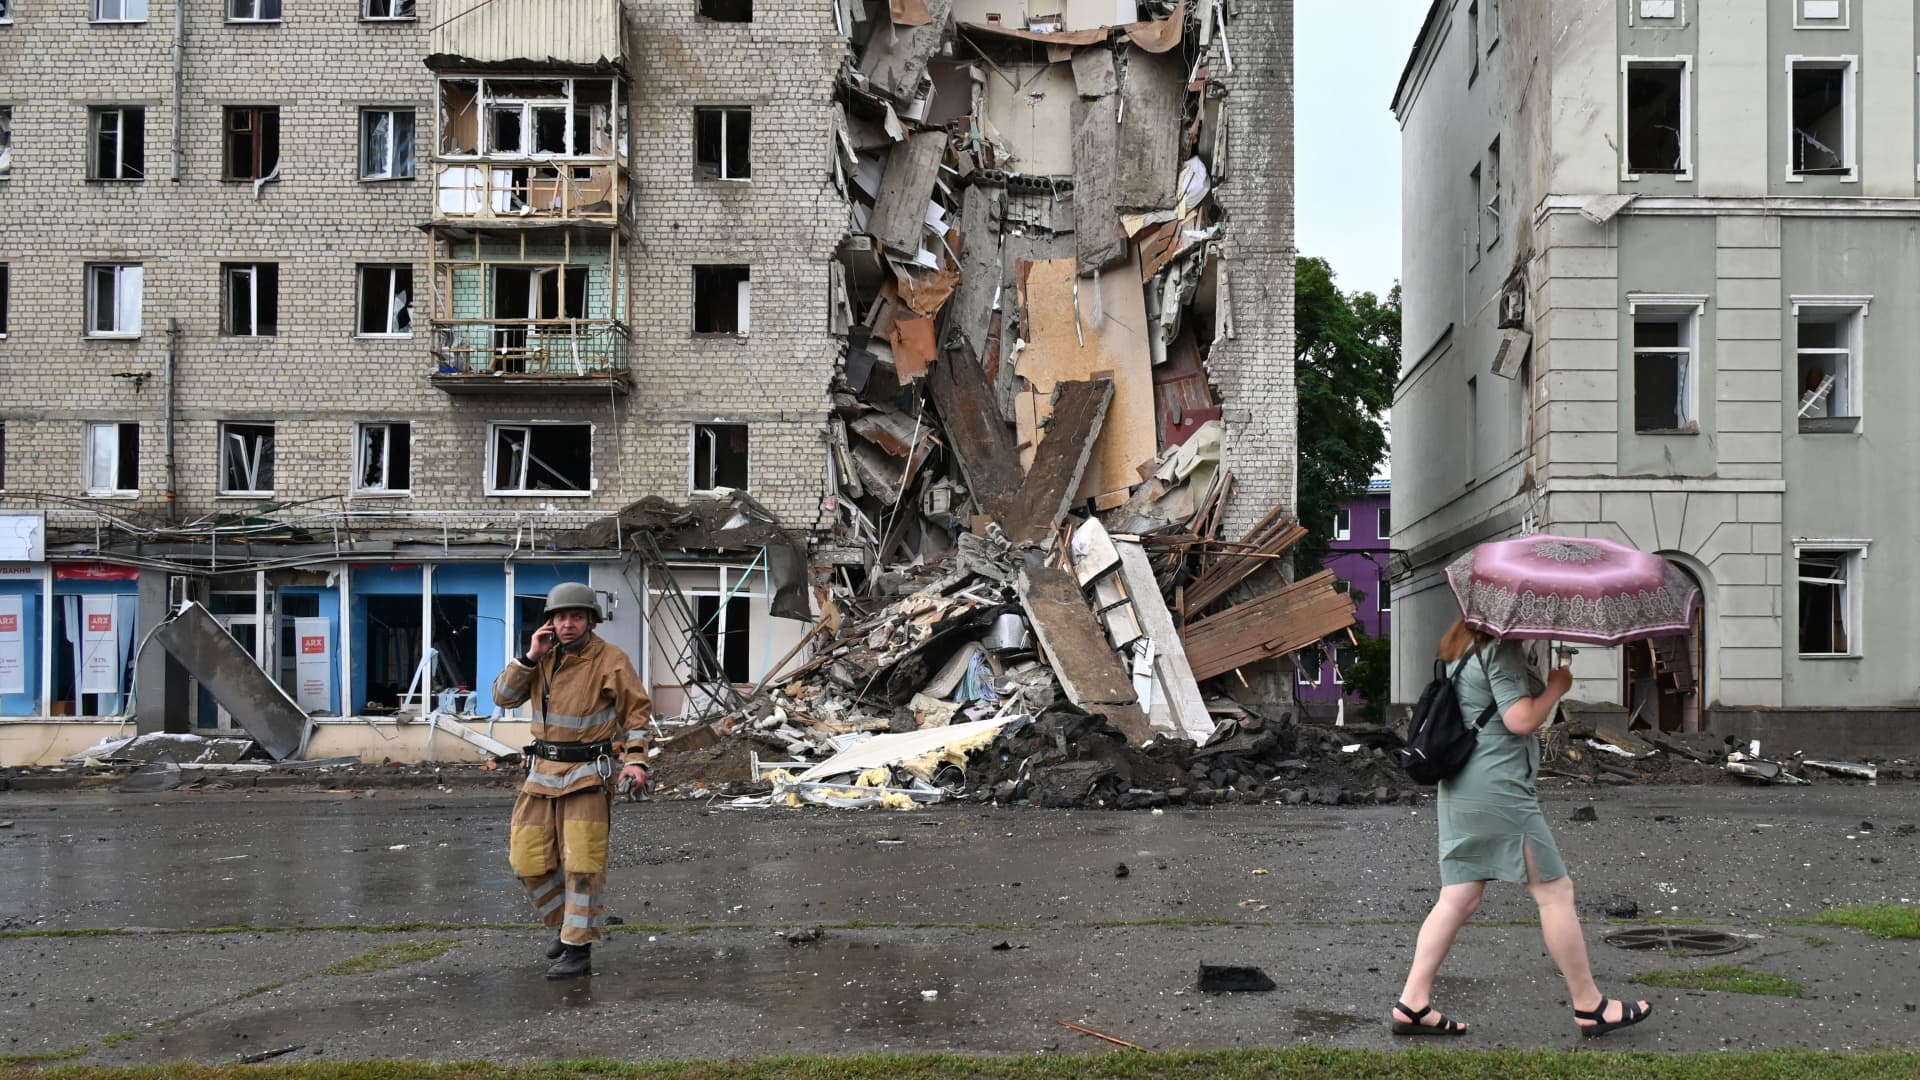 A local resident walks past a Ukrainian rescuer working outside a building partially destroyed after a Russian missile strike in Kharkiv on July 11, 2022, amid Russia's military invasion launched on Ukraine.